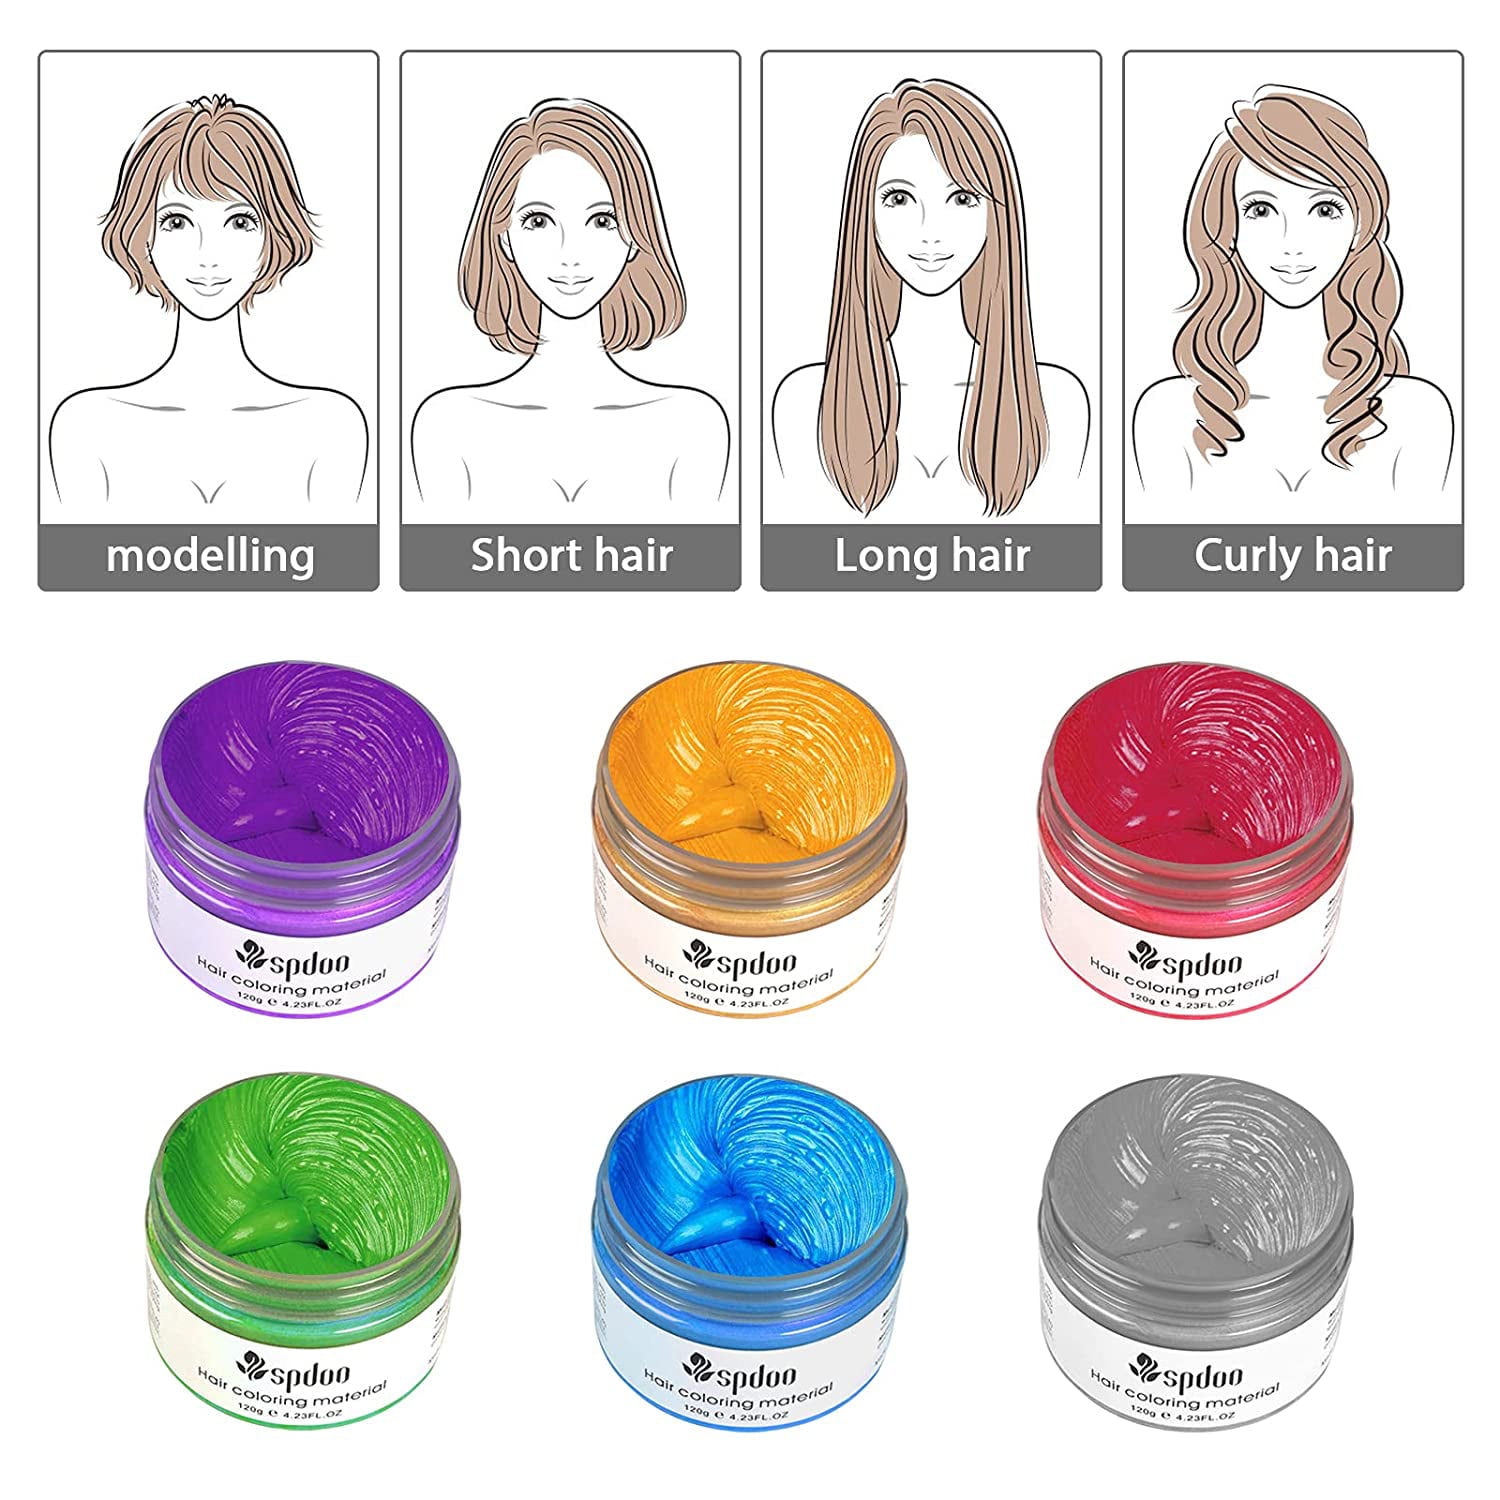 The Best Hair Color Wax of 2022 - How to Use Hair Color Wax